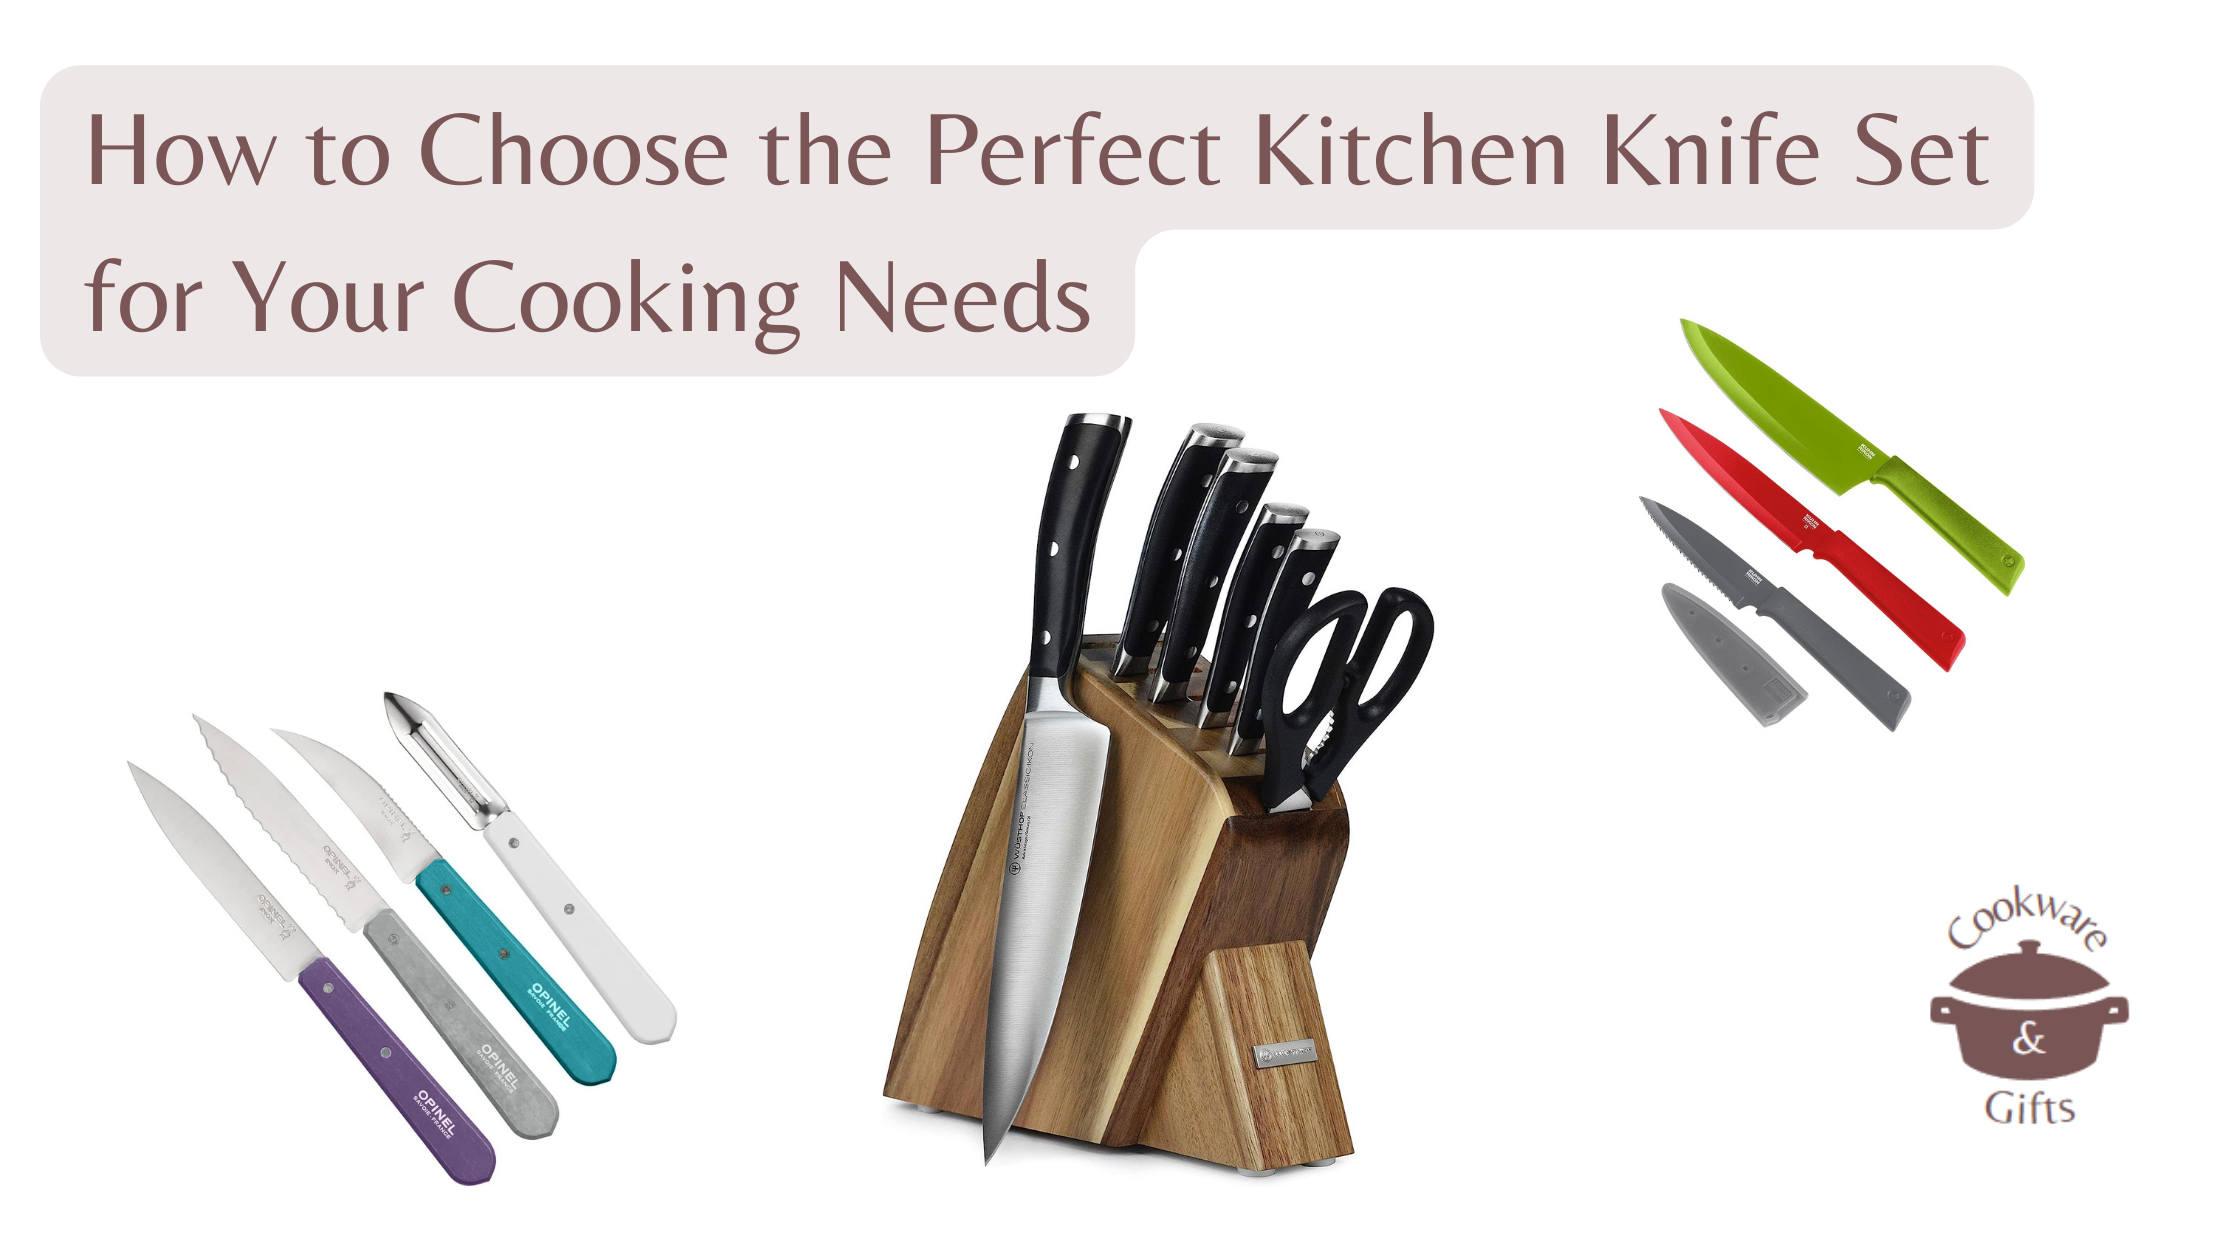 How to Choose the Perfect Kitchen Knife Set for Your Cooking Needs